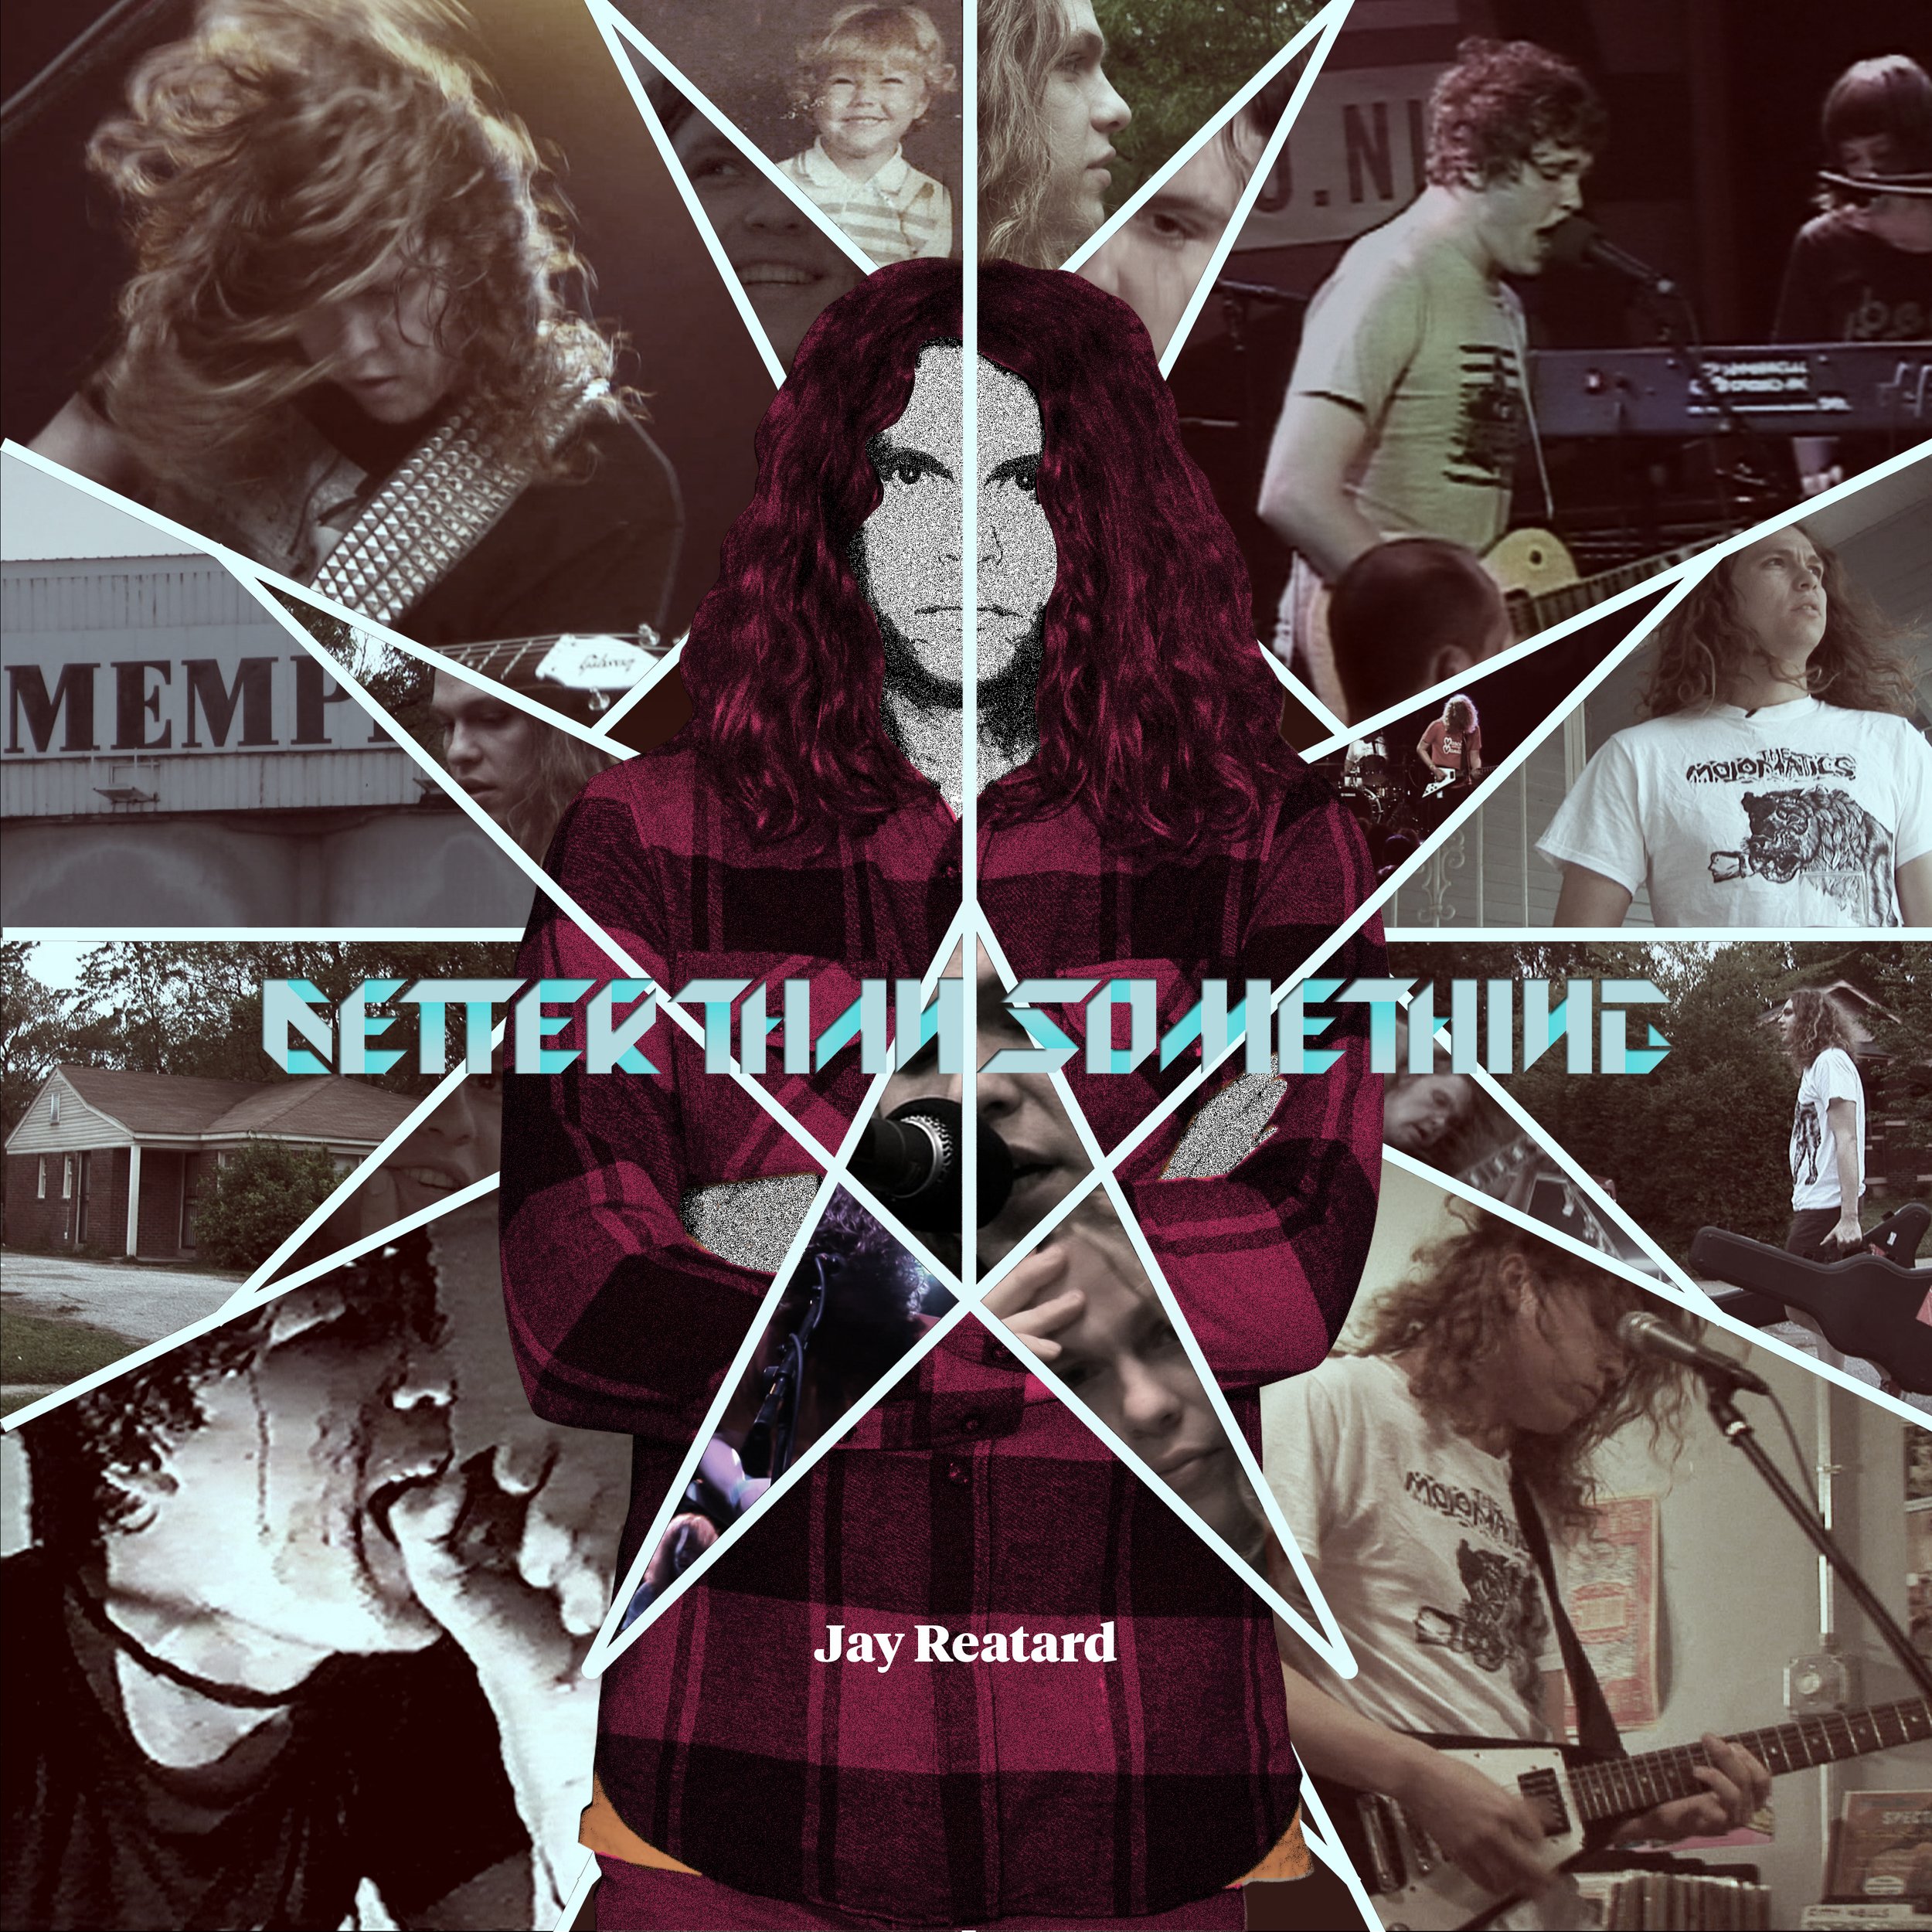 JAY REATARD /// BETTER THAN SOMETHING SOUNDTRACK